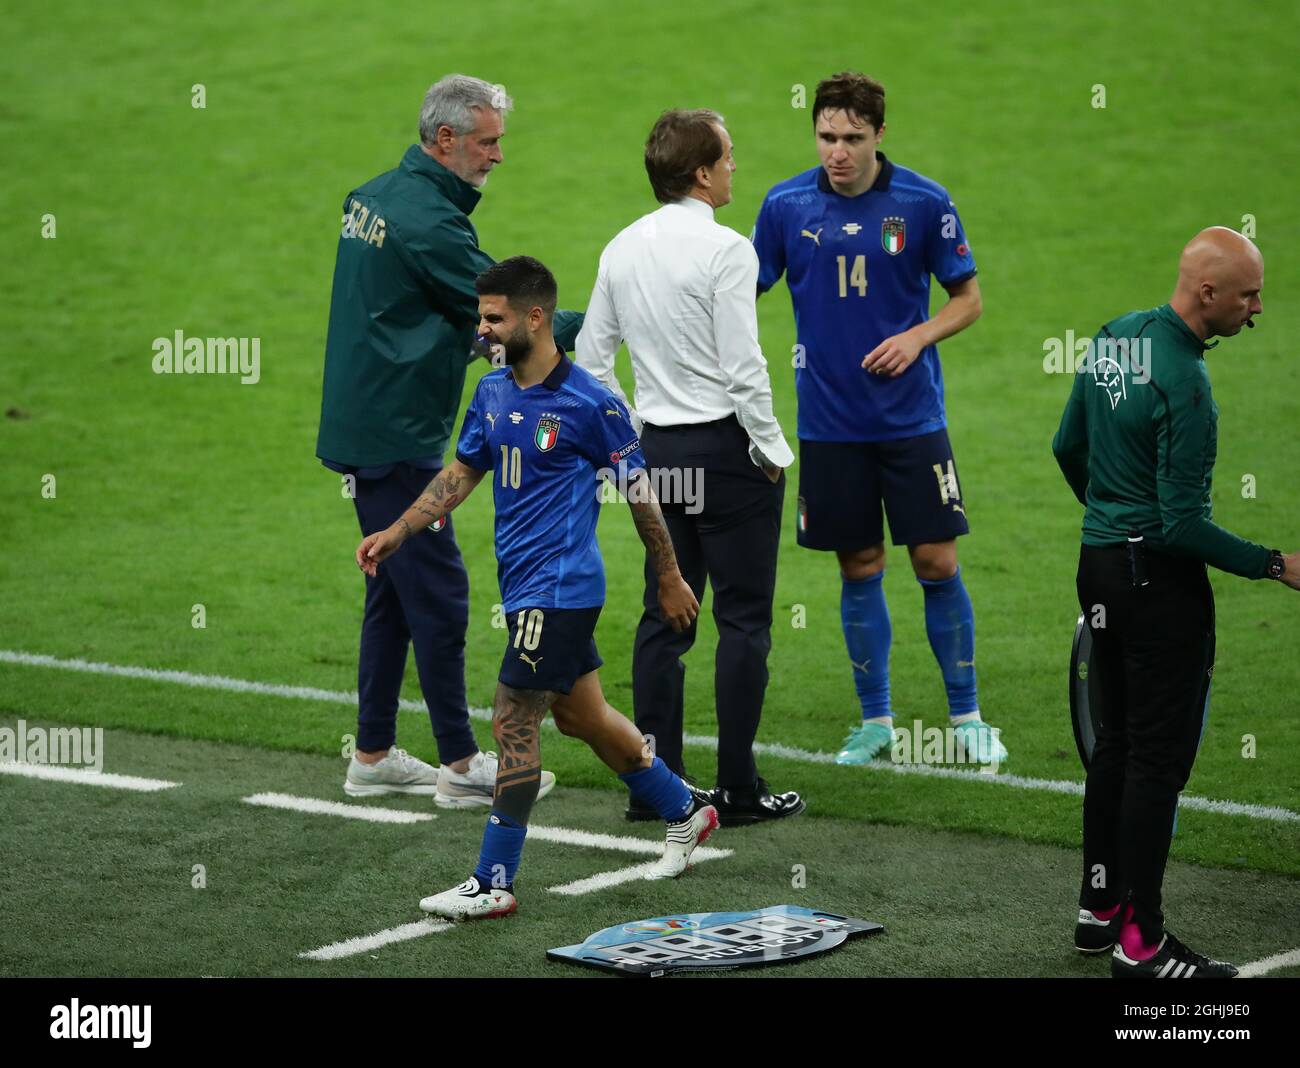 London, England, 6th July 2021. Roberto Mancini coach of Italy instructs Federico Chiesa of Italy  during the UEFA Euro 2020 match at Wembley Stadium, London. Picture credit should read: David Klein / Sportimage via PA Images Stock Photo